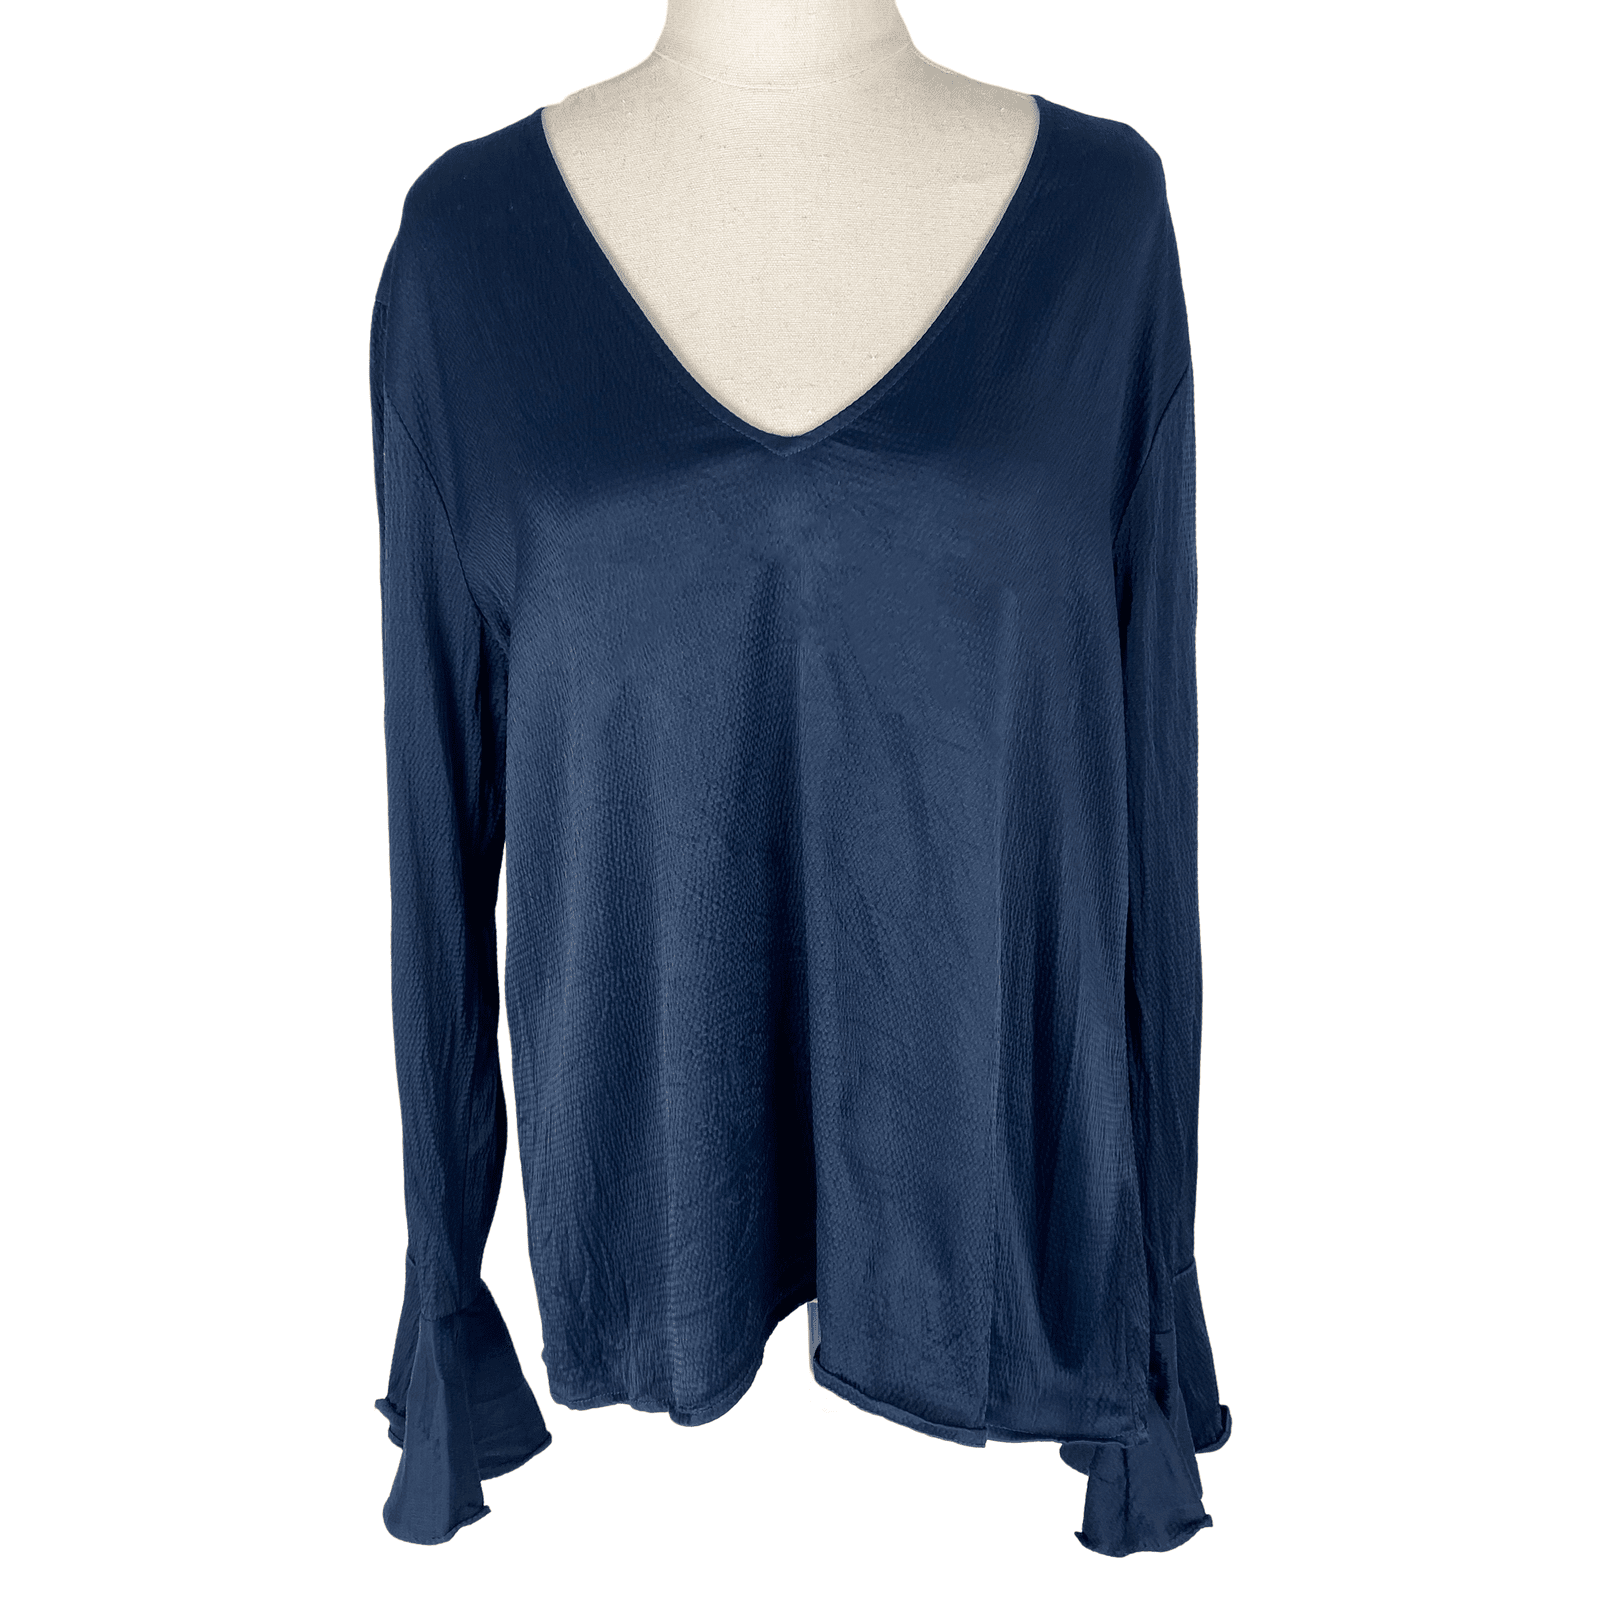 Ruby navy v-neck top with ruffle sleeves | size 10